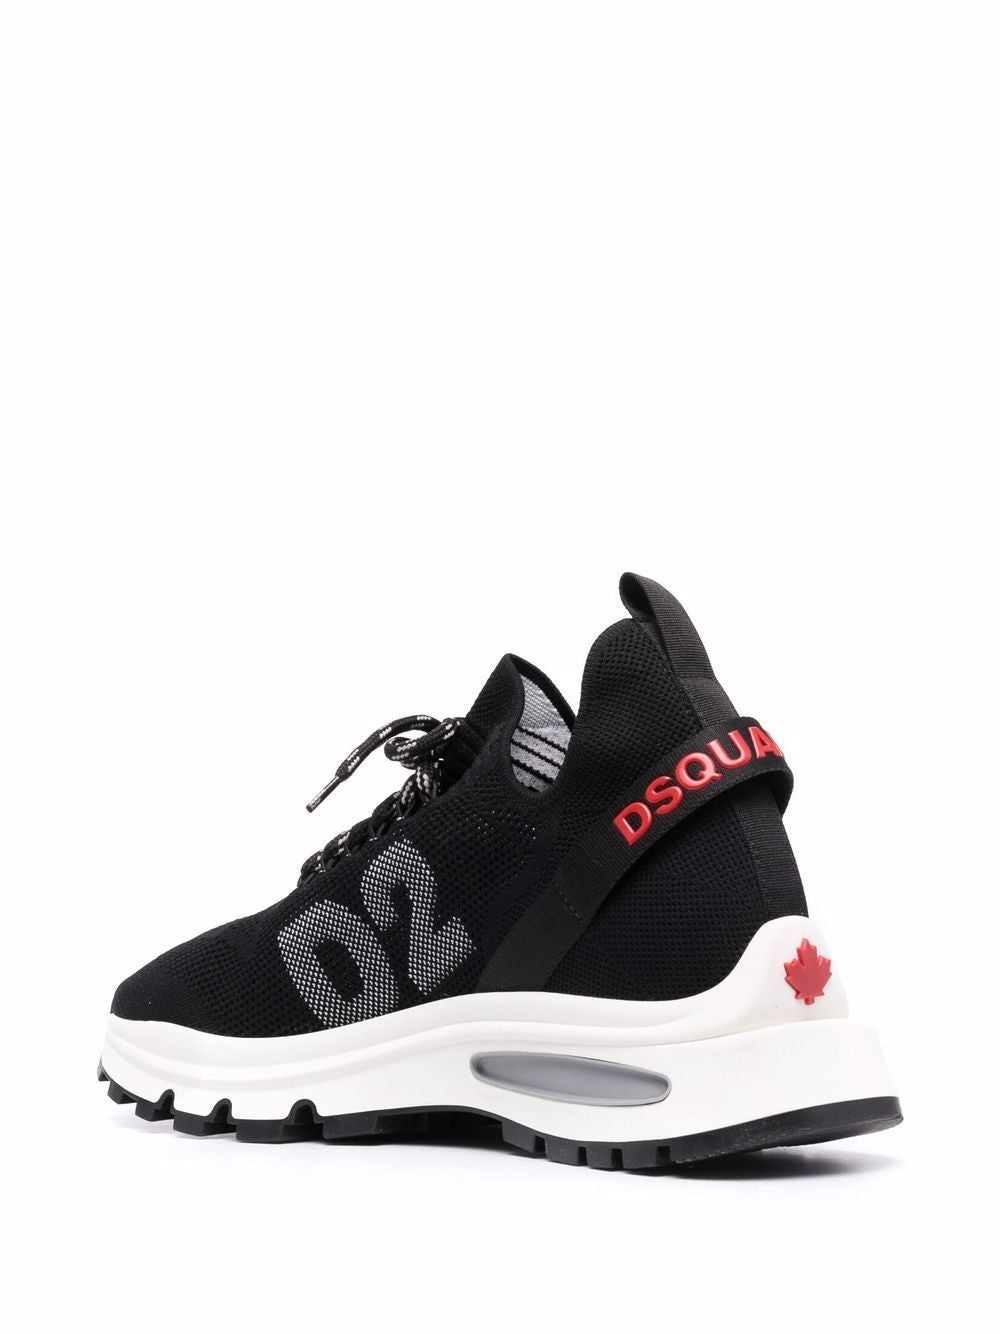 DSQUARED2 Classic Black Sneakers for Men from SS22 Collection